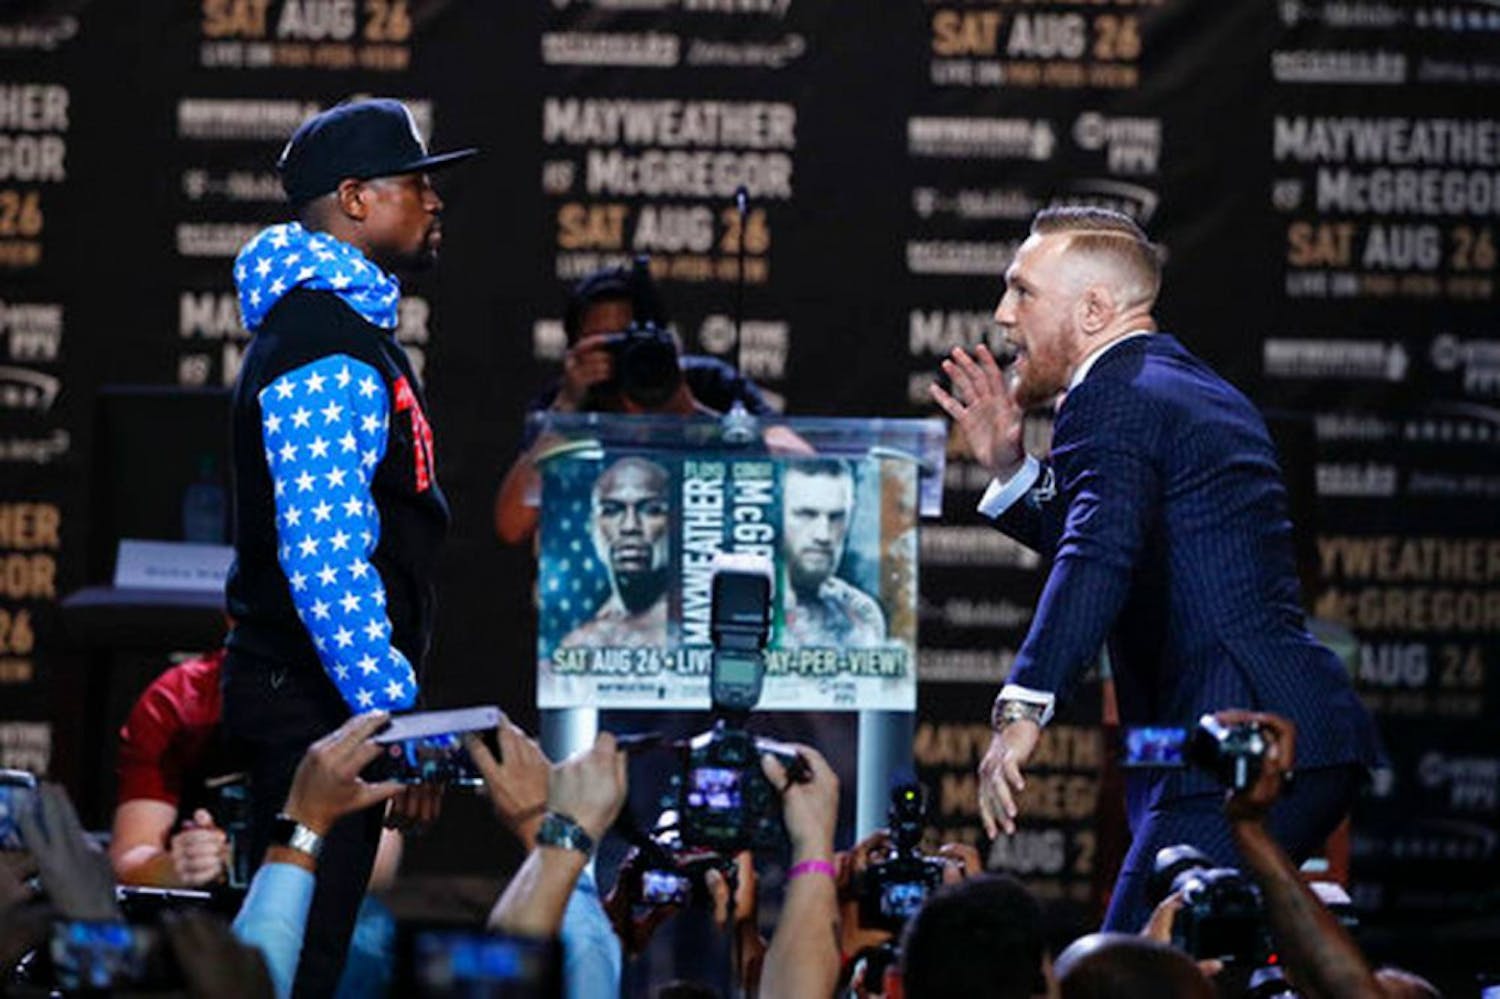 Conor McGregor (right) taunts Floyd Mayweather Jr. while posing for photos during a press conference on July 11, 2017, in Los Angeles.